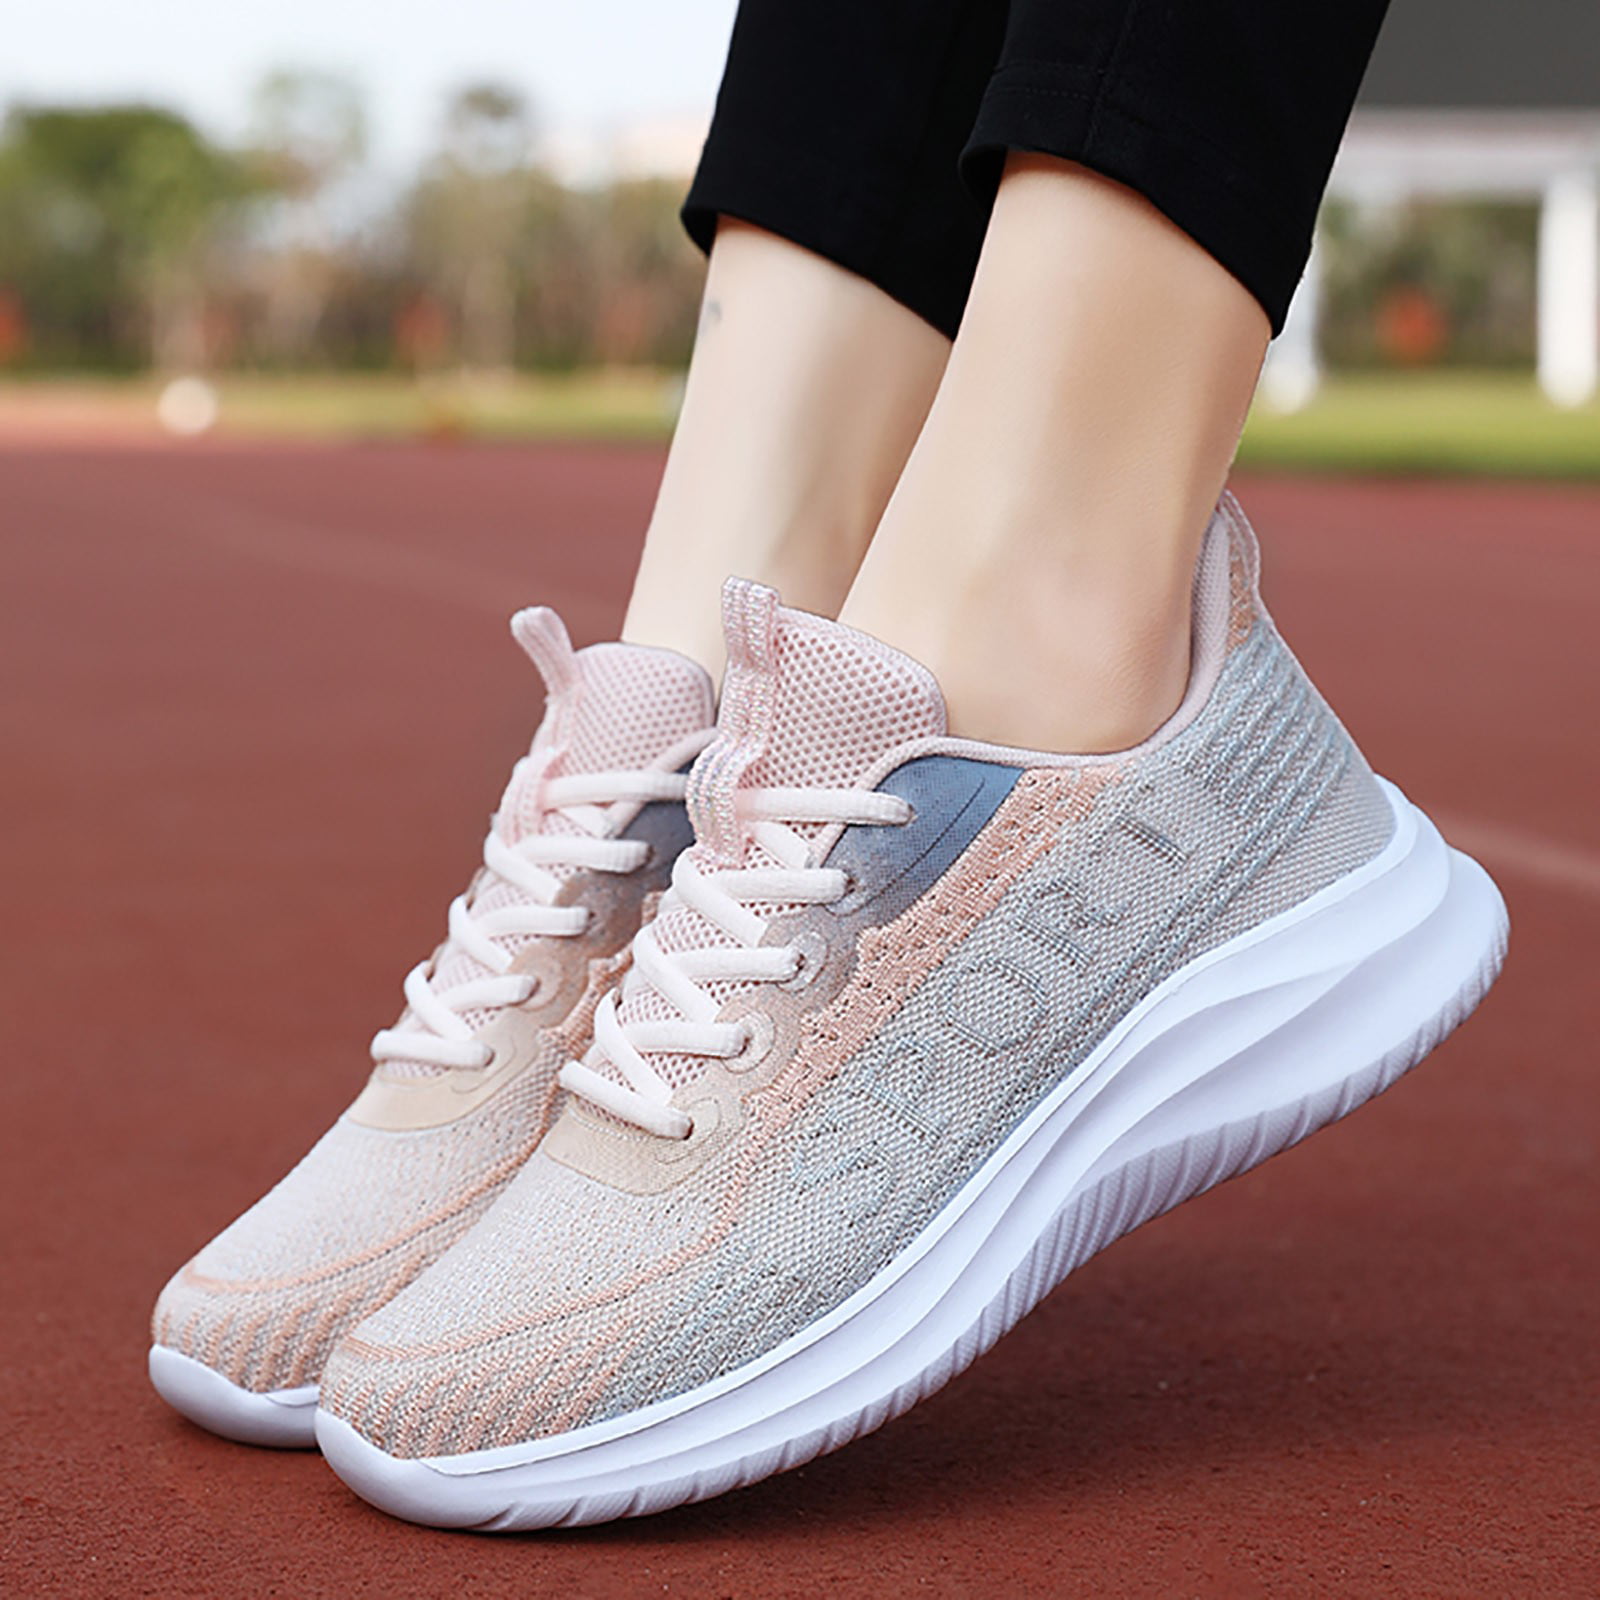 KaLI_store Flats Shoes Women Dressy Comfortable Walking Shoes Women  Lightweight Breathable Sneakers for Women Non-Slip Fashion Casual Tennis  Running